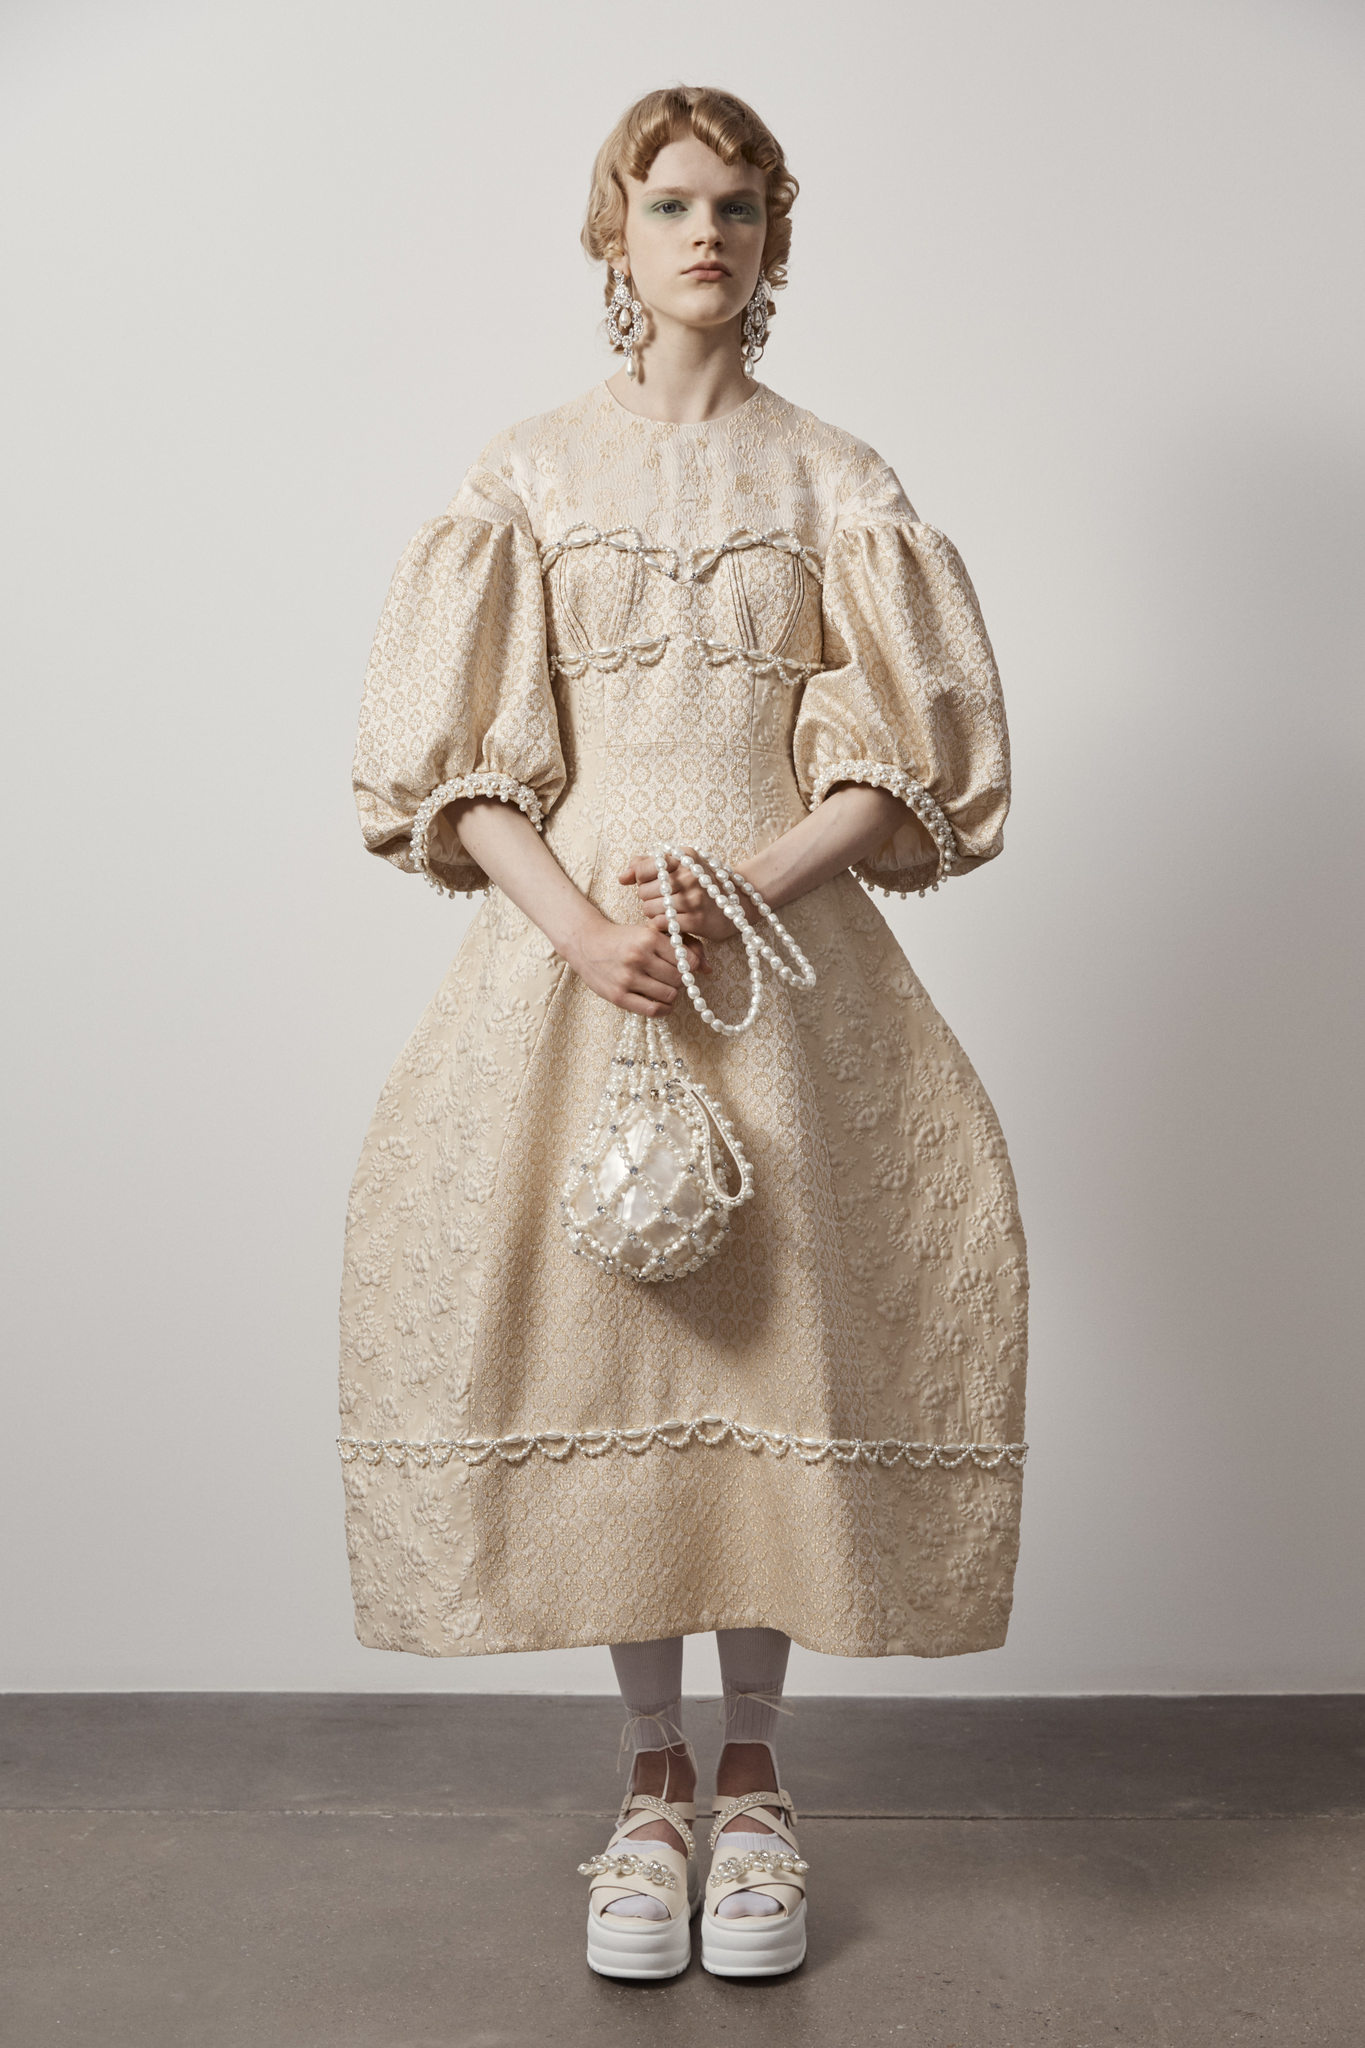 Simone Rocha: Graduated from the MA Fashion course at Central Saint Martins in London in 2010. 1370x2050 HD Background.